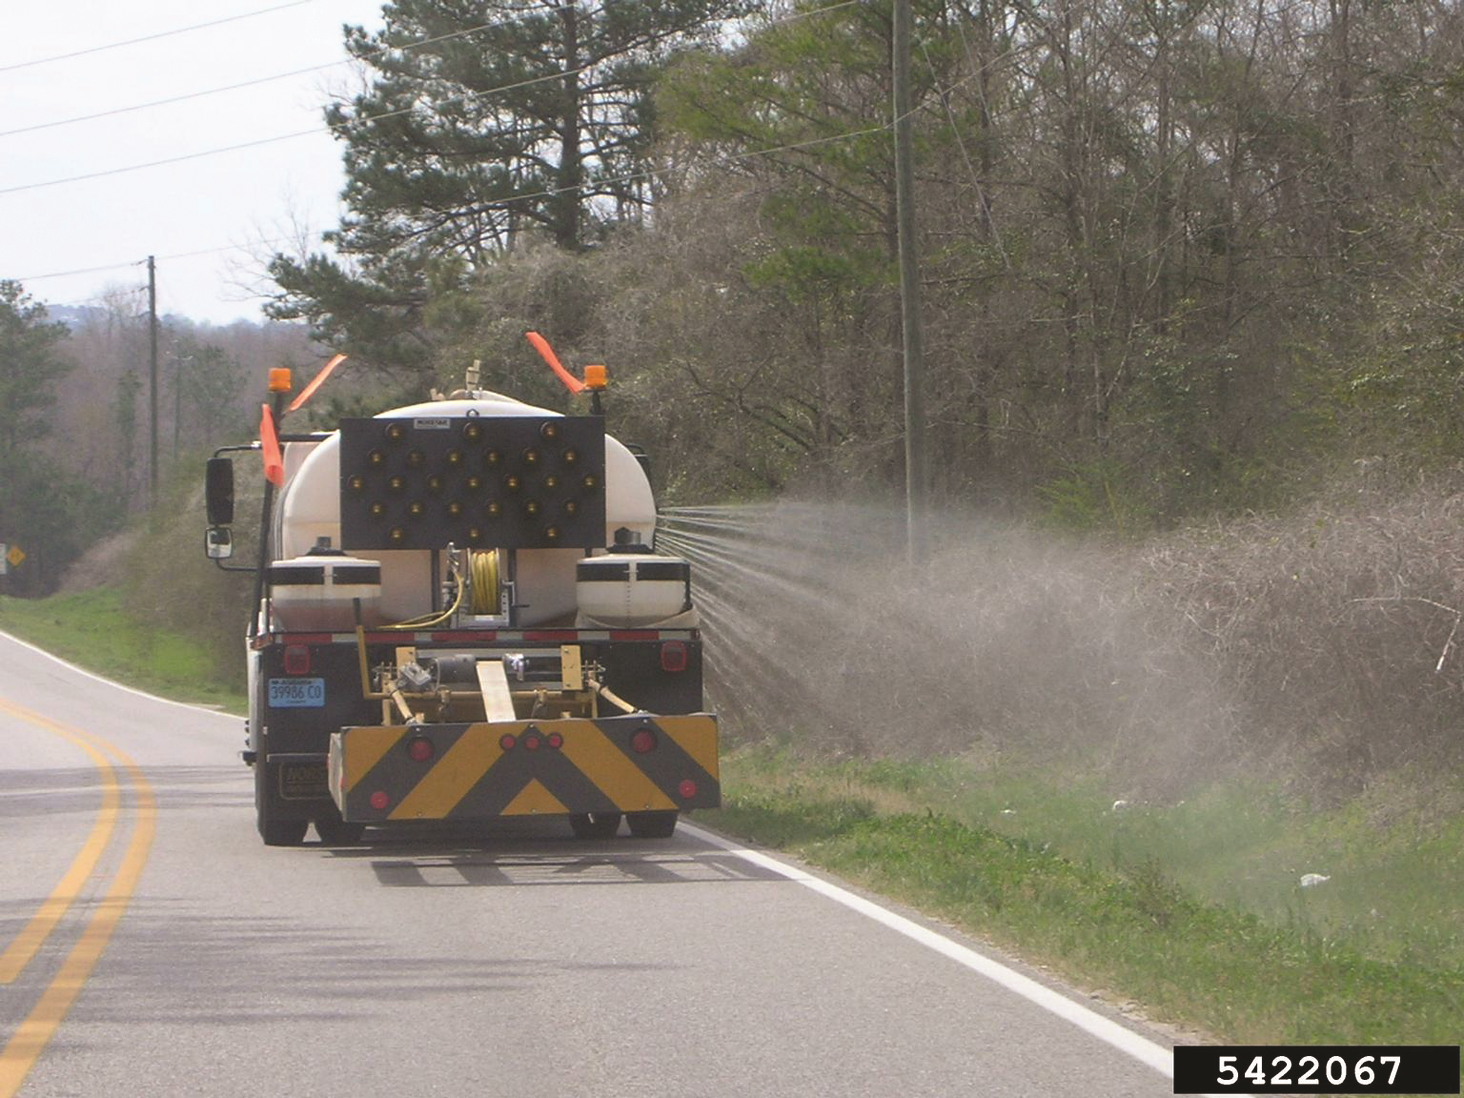 Herbicide sprayed from a truck along the road side